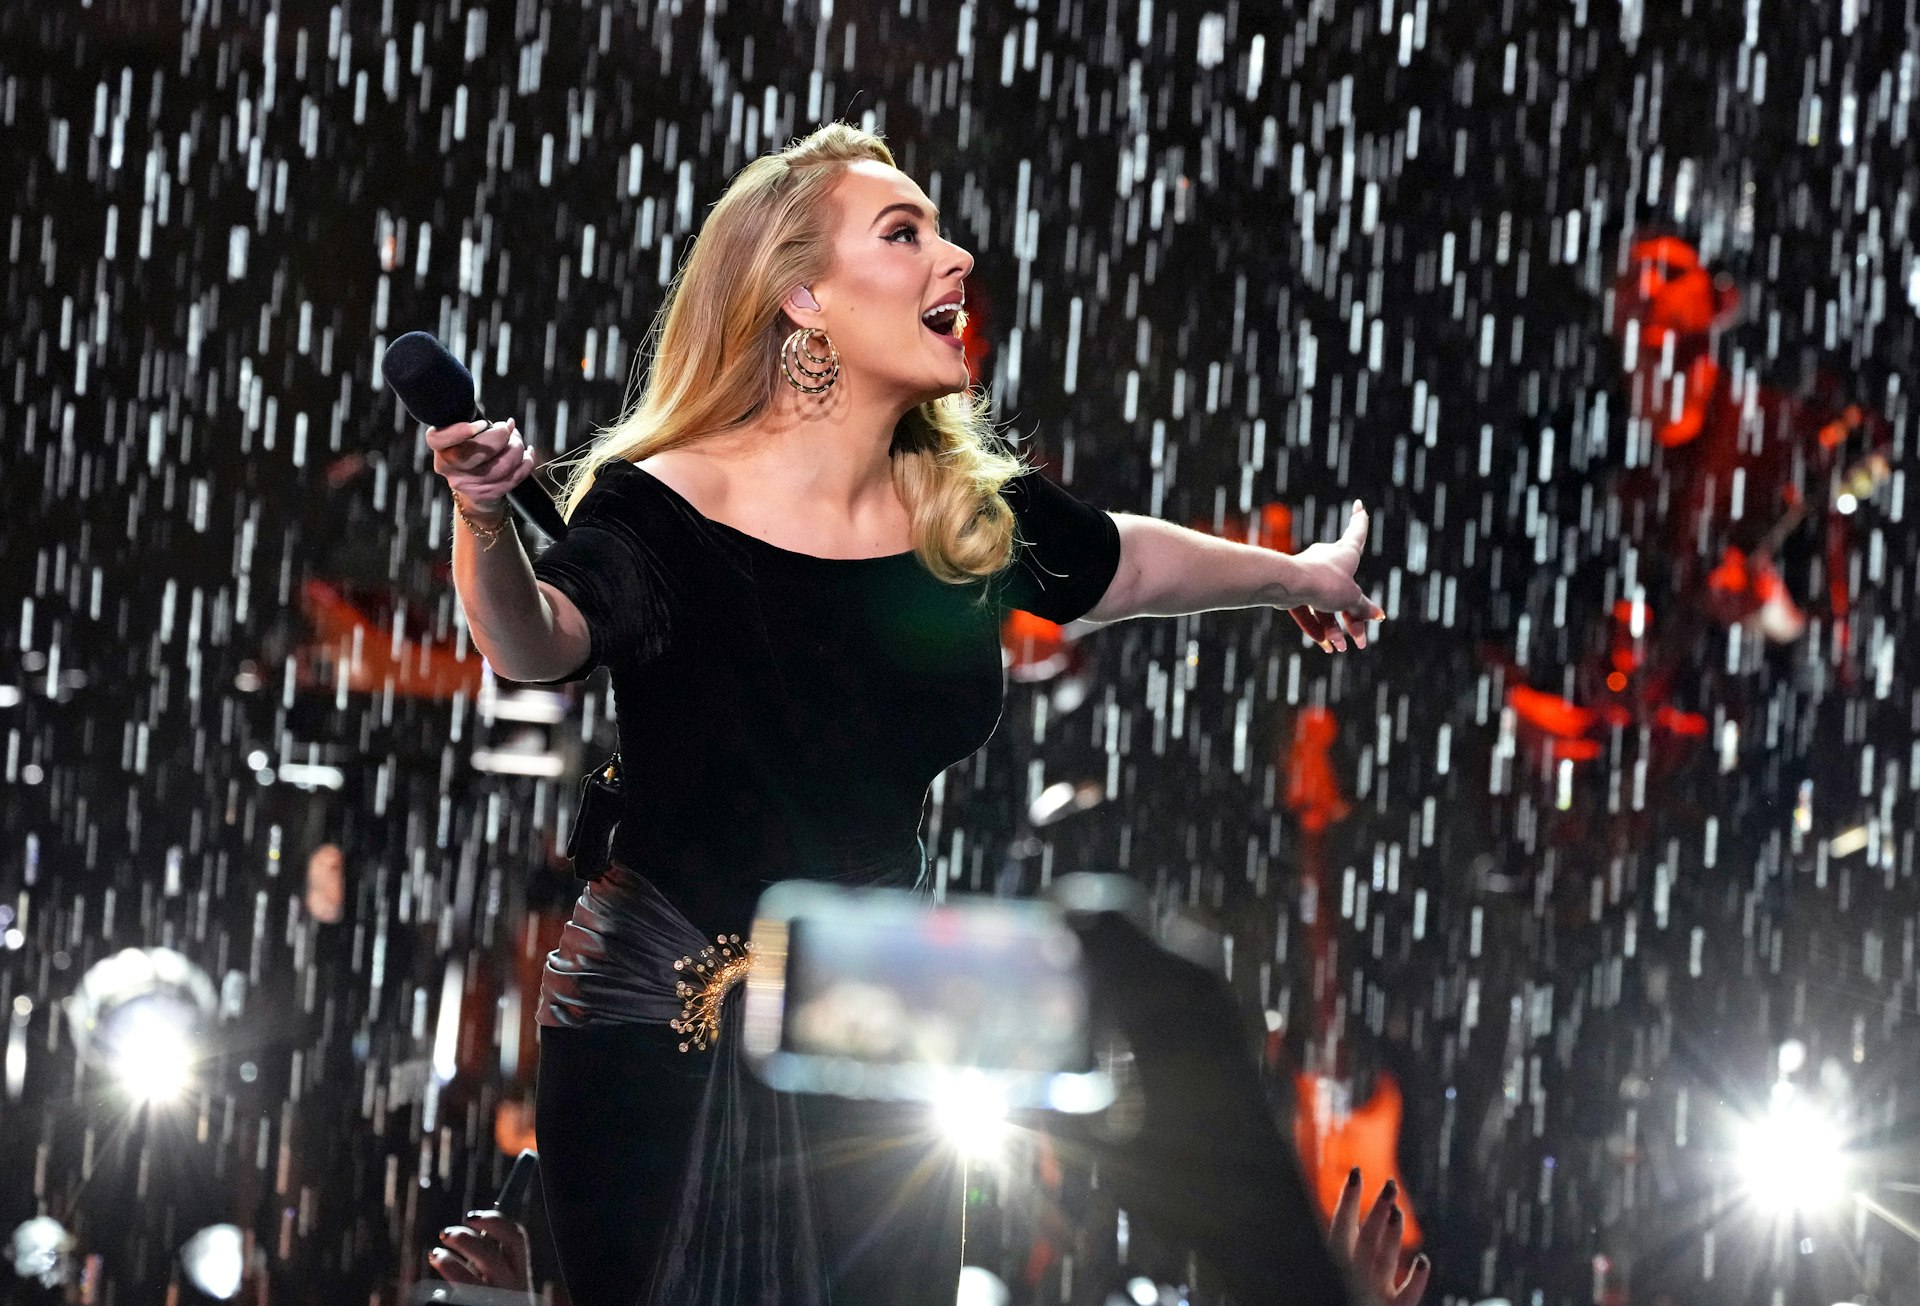 Adele performs onstage during the "Weekends with Adele" Residency at The Colosseum at Caesars Palace, Las Vegas, Nevada, USA